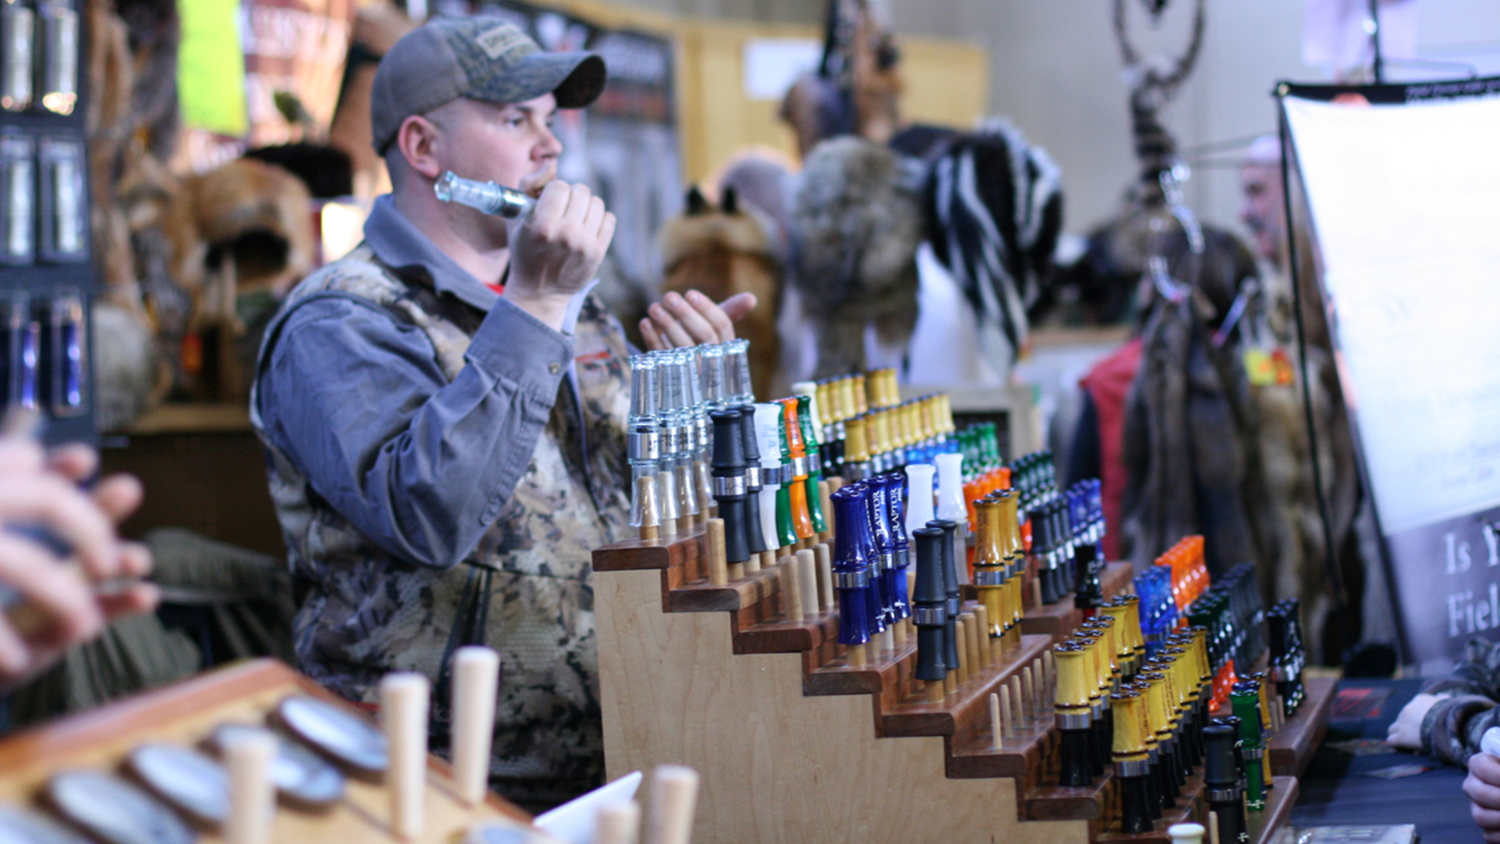 Shopping 101 at the Great American Outdoor Show